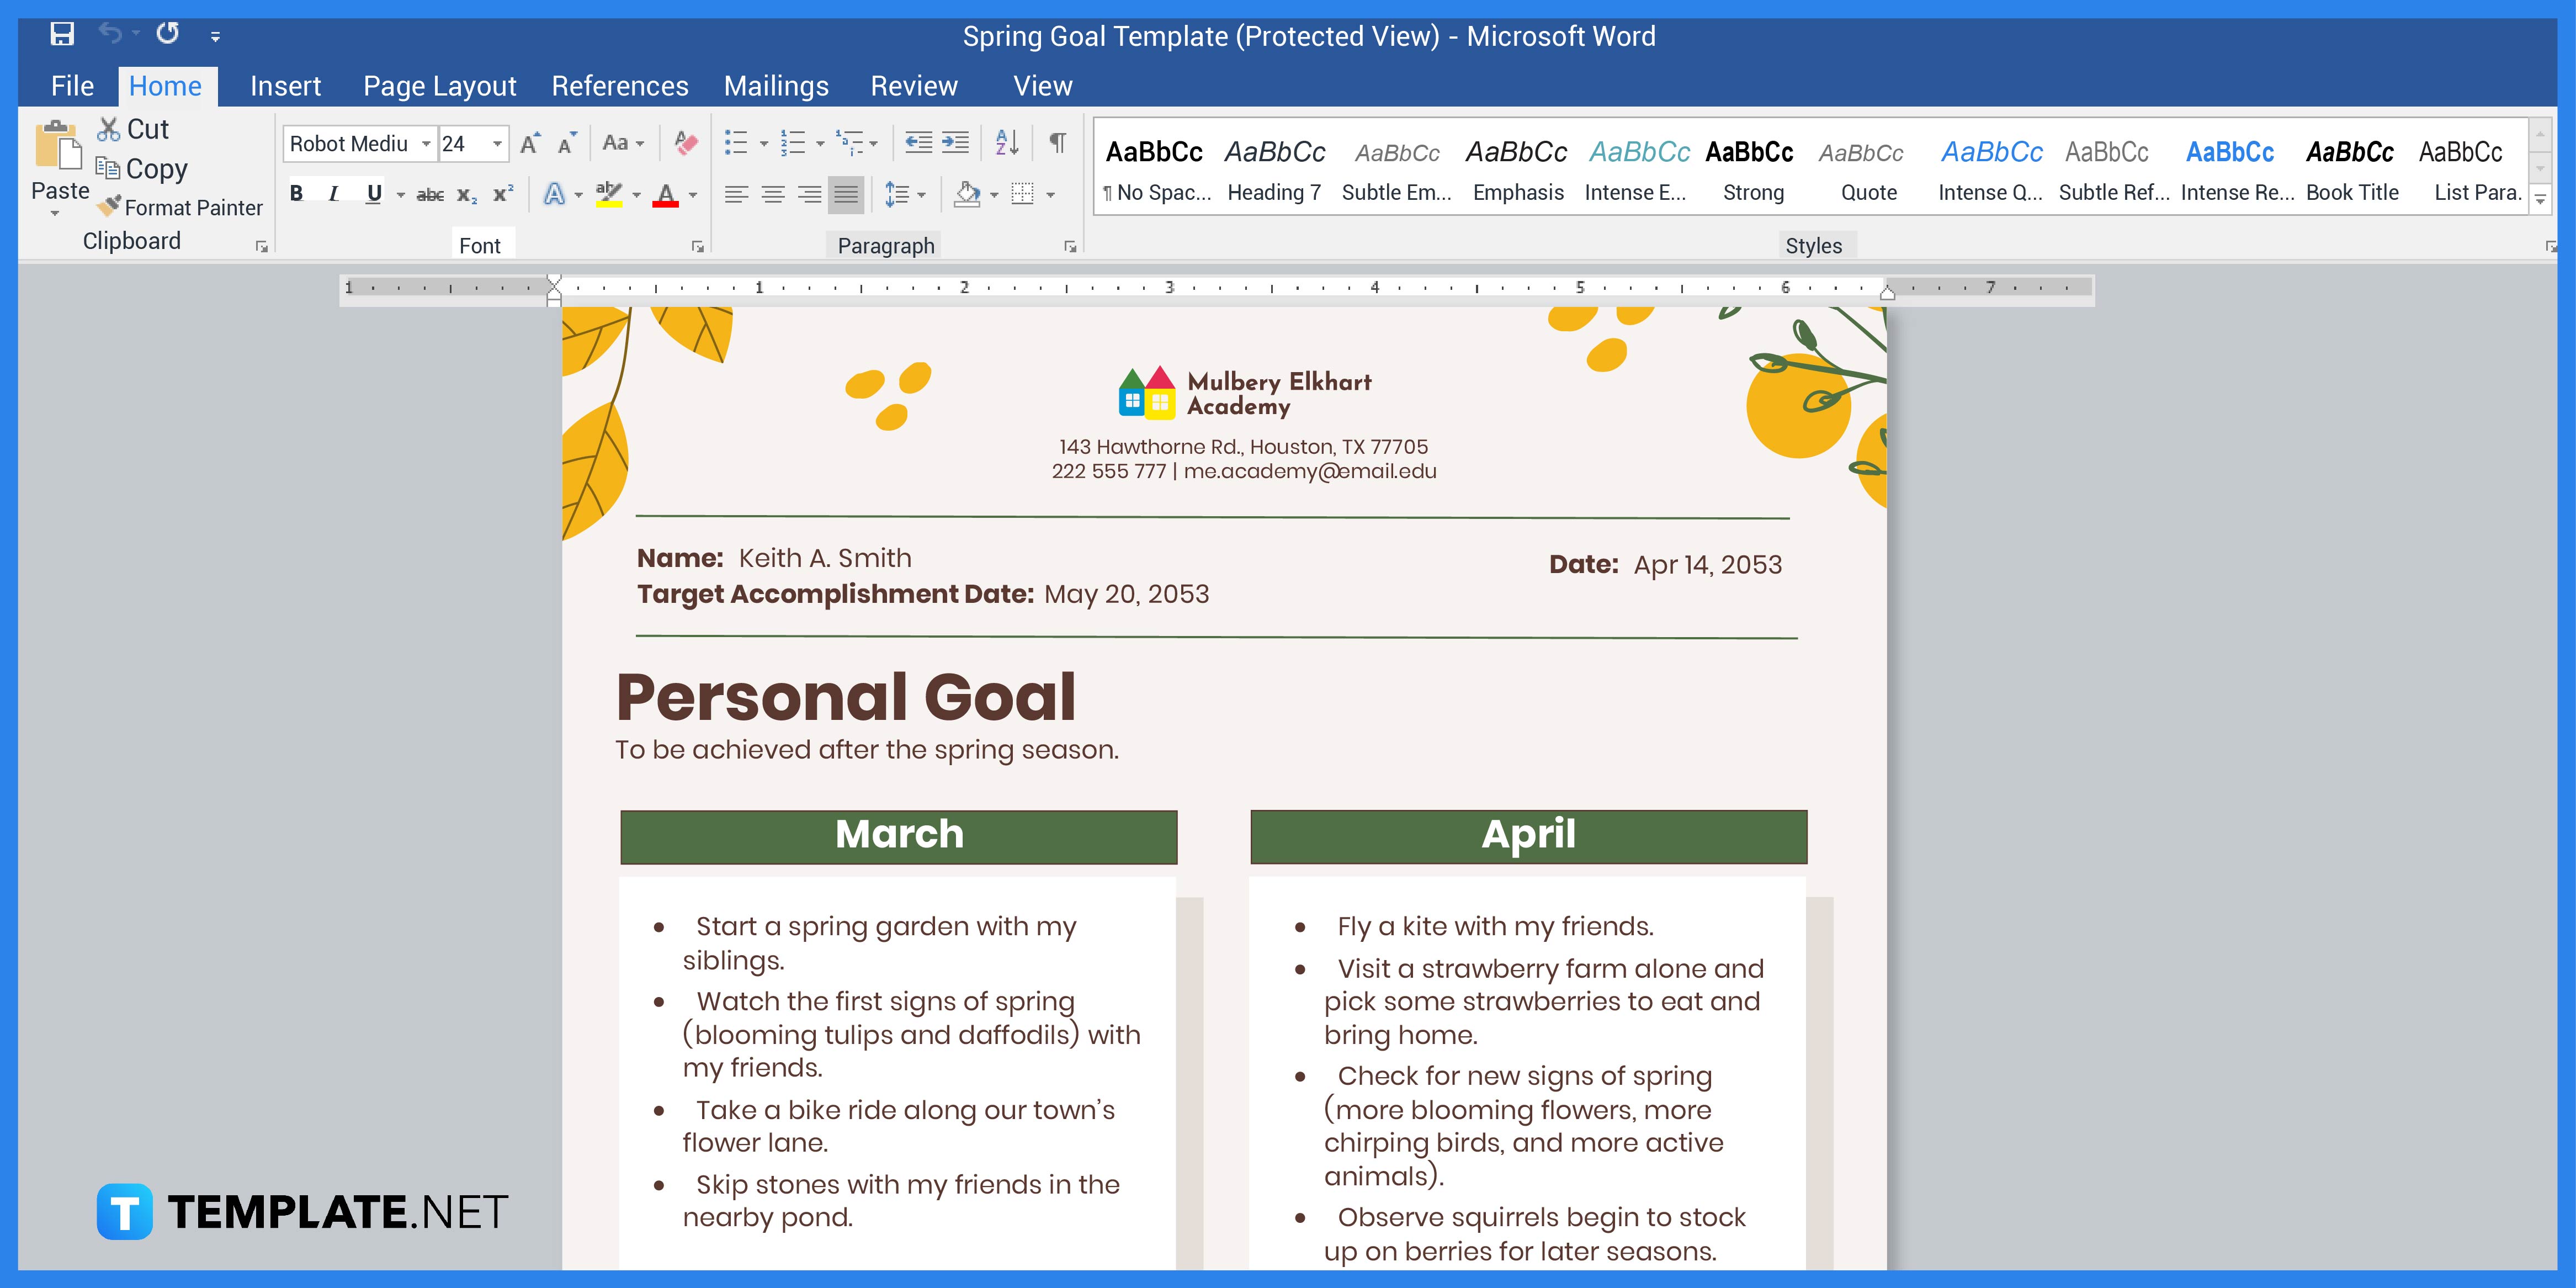 how to make spring goals in microsoft word template example 2023 step